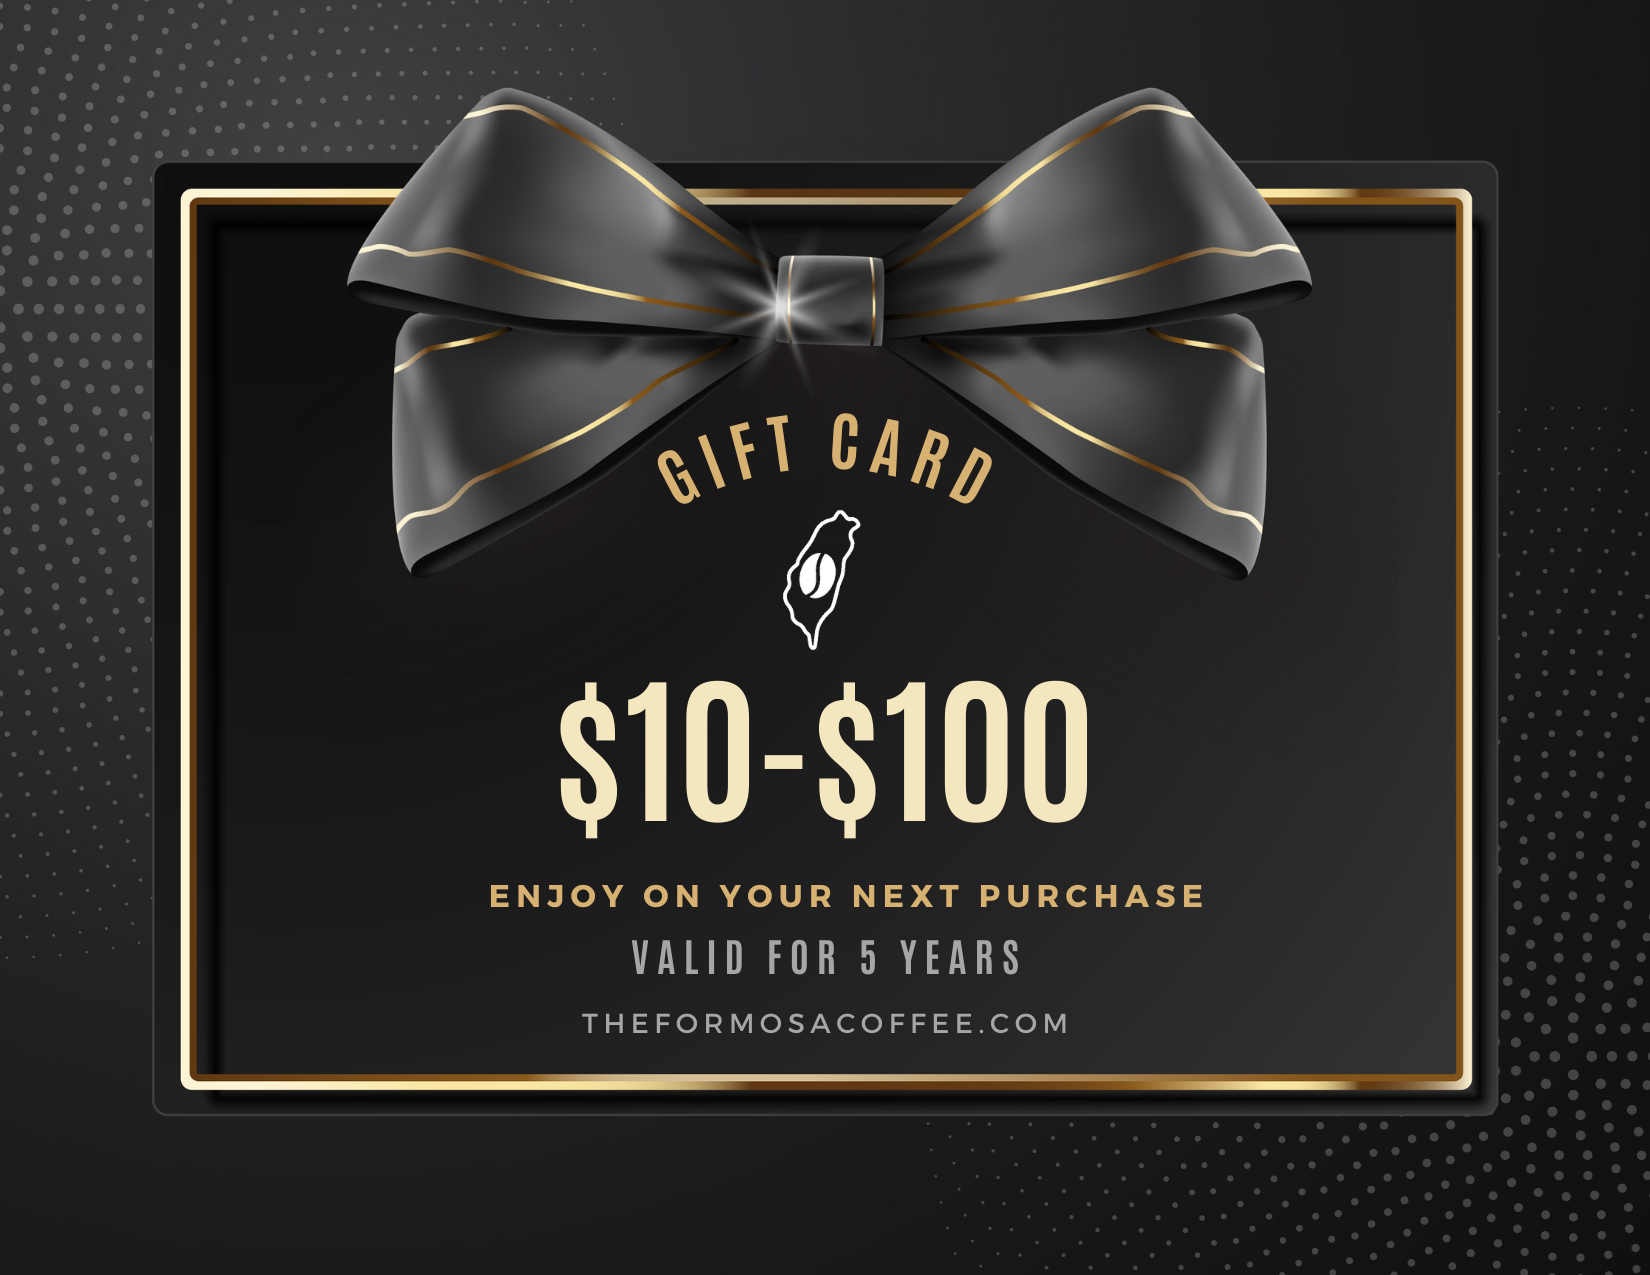 Gift Card THE FORMOSA COFFEE